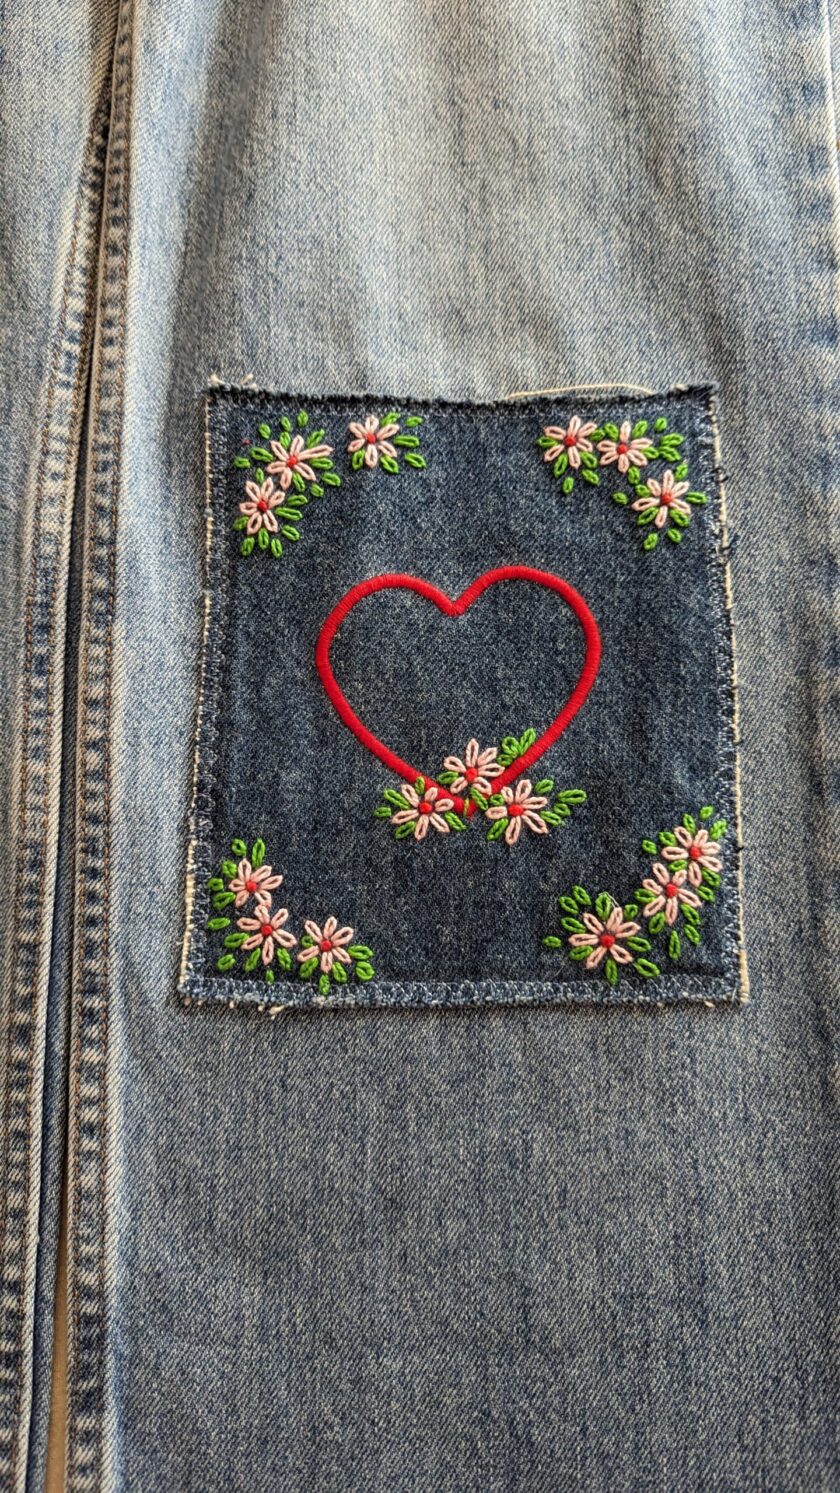 A denim jacket with a heart embroidered on it.